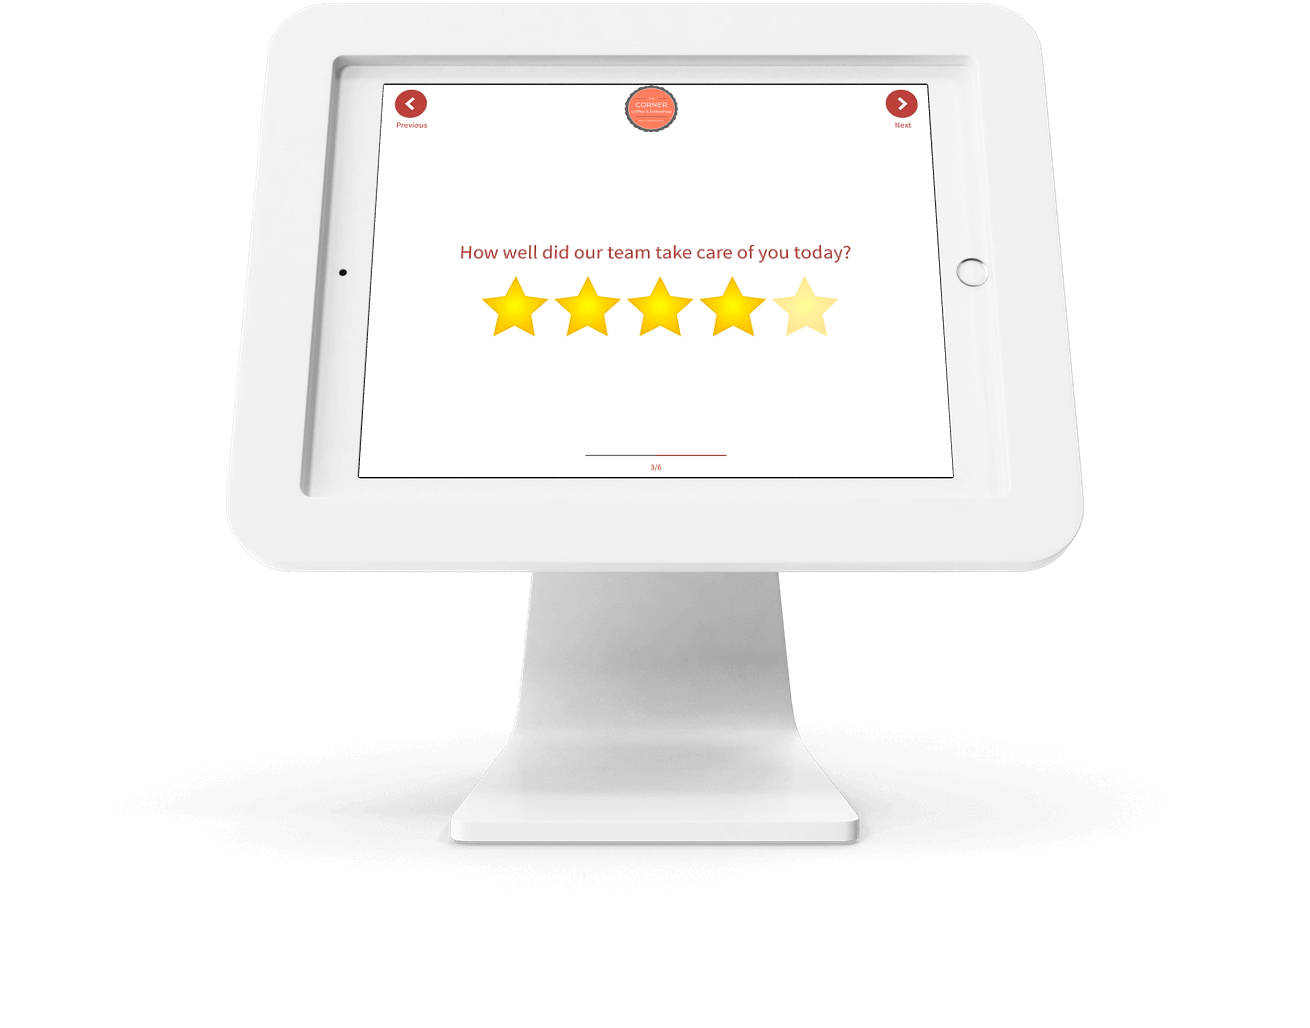 Tablet-based Feedback Kiosk with 5 Star Rating Question